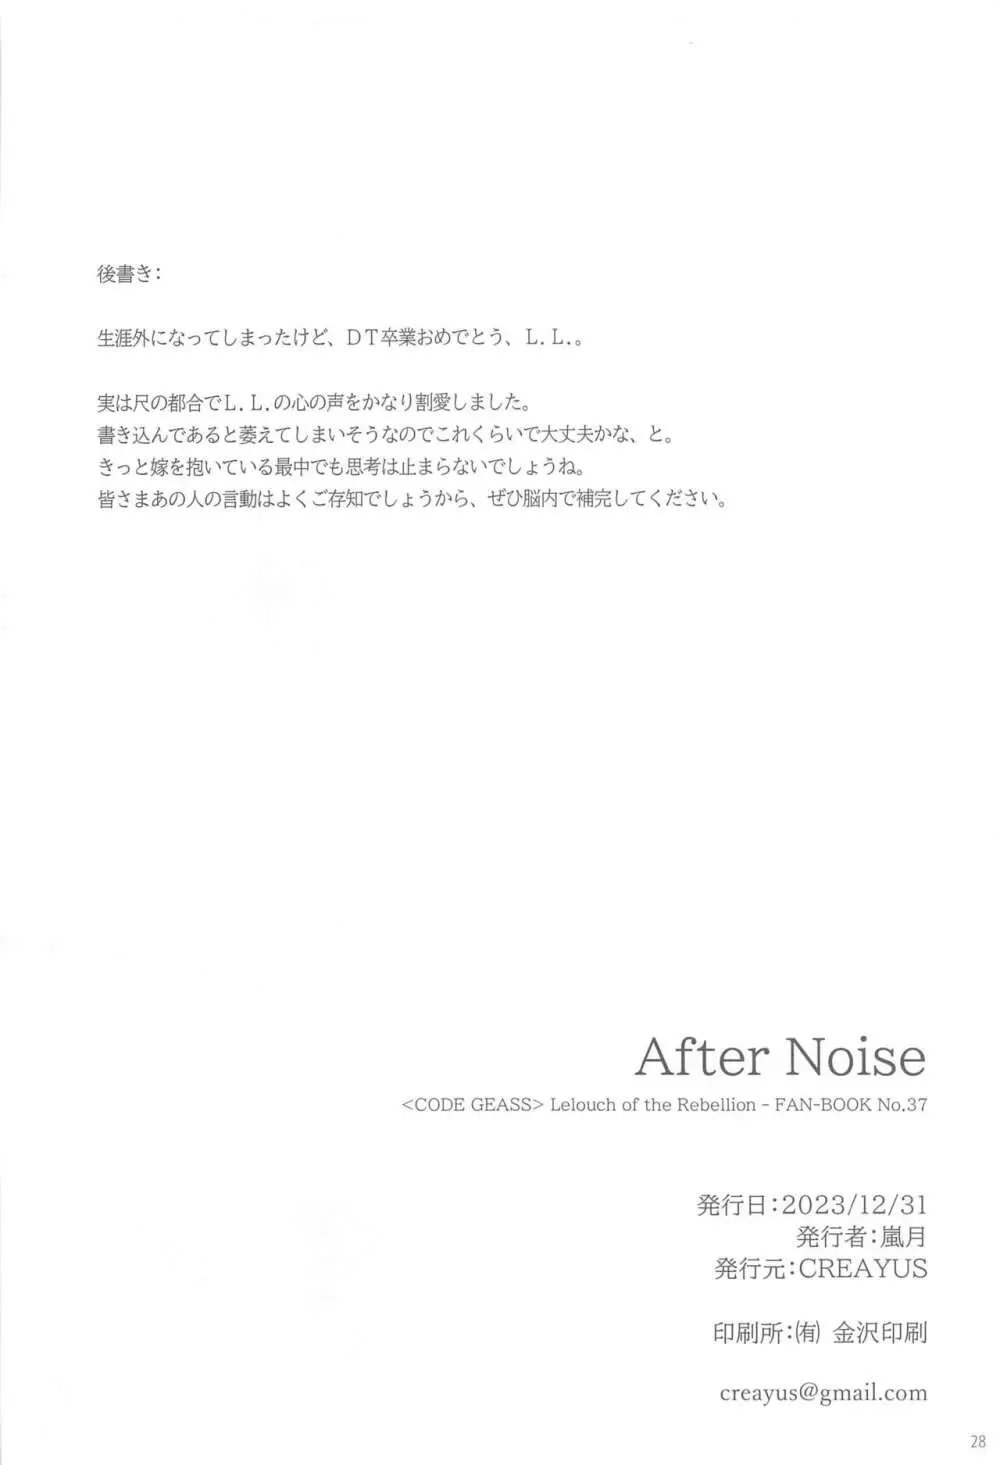 After Noise